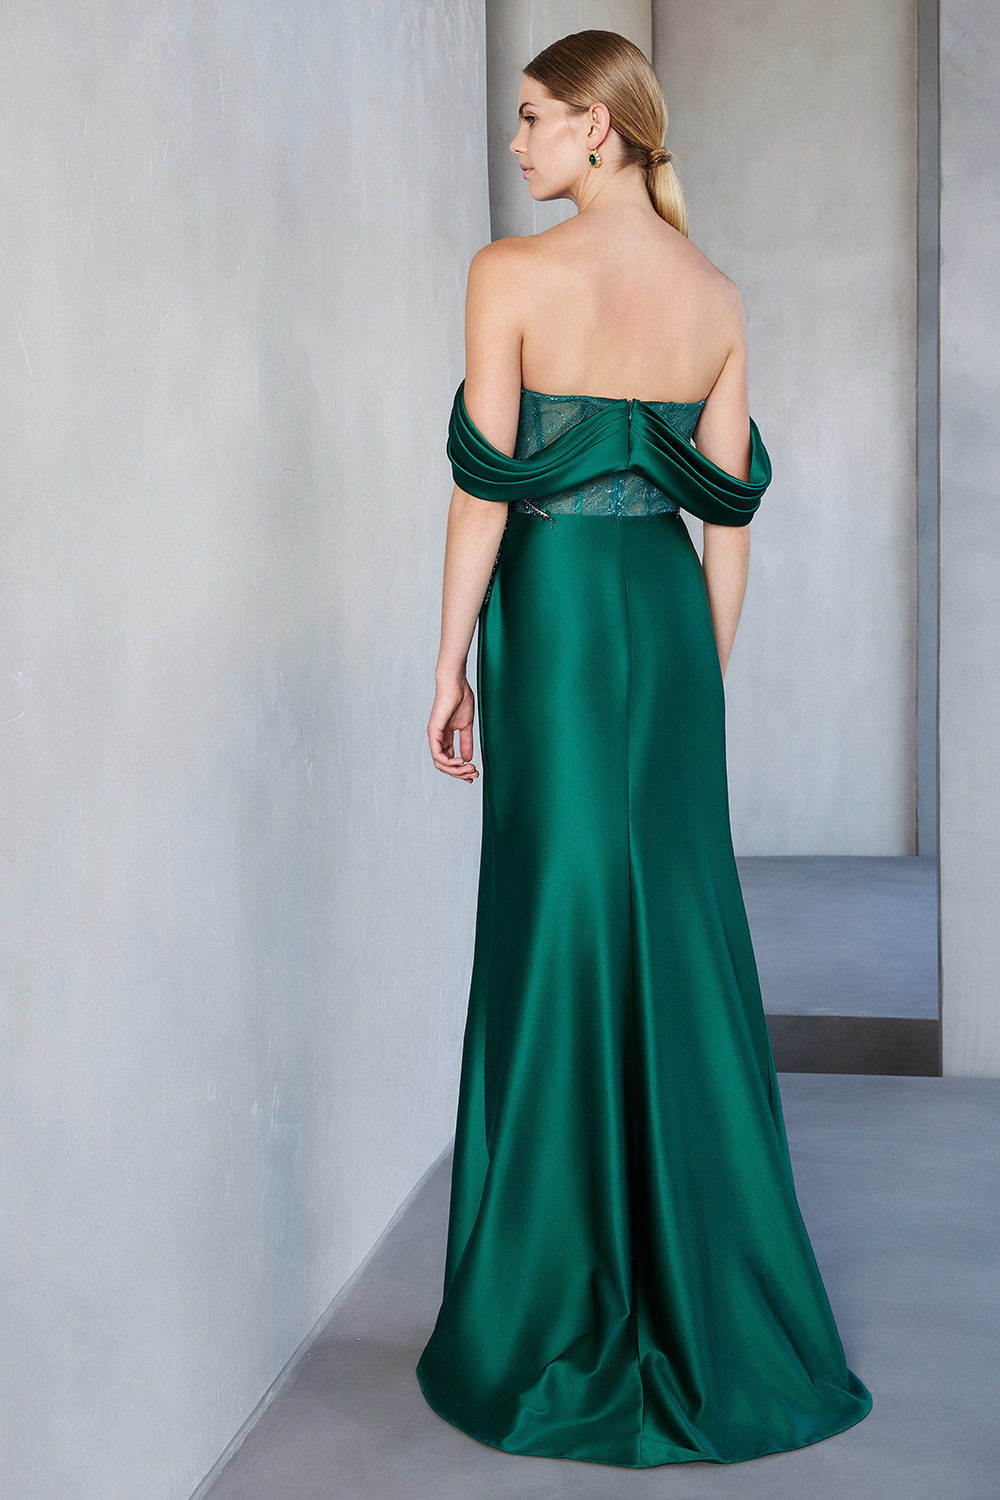 Evening Dresses / Long evening satin dress with lace and beading at the top